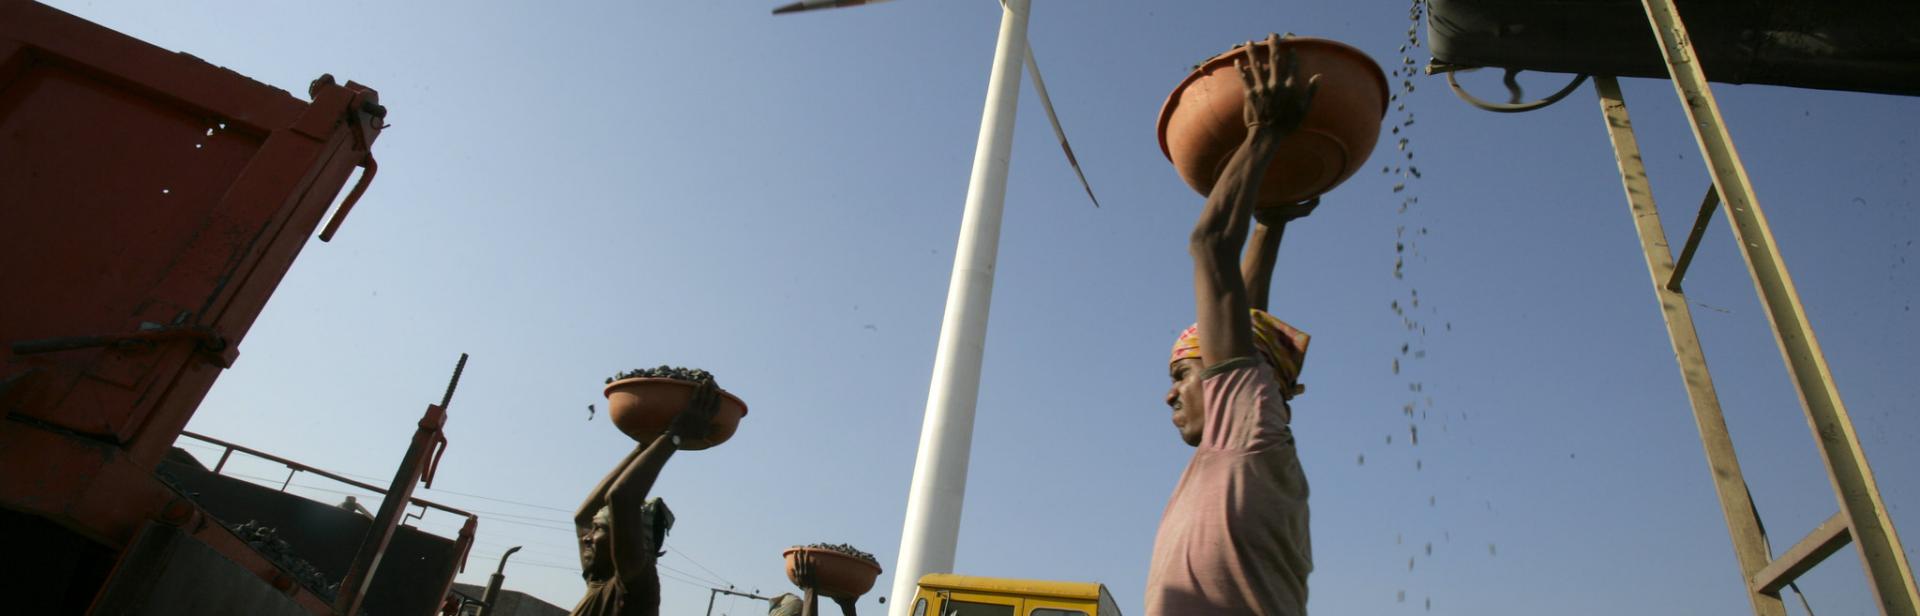 laborers carrying stones with a wind turbine and truck in the background